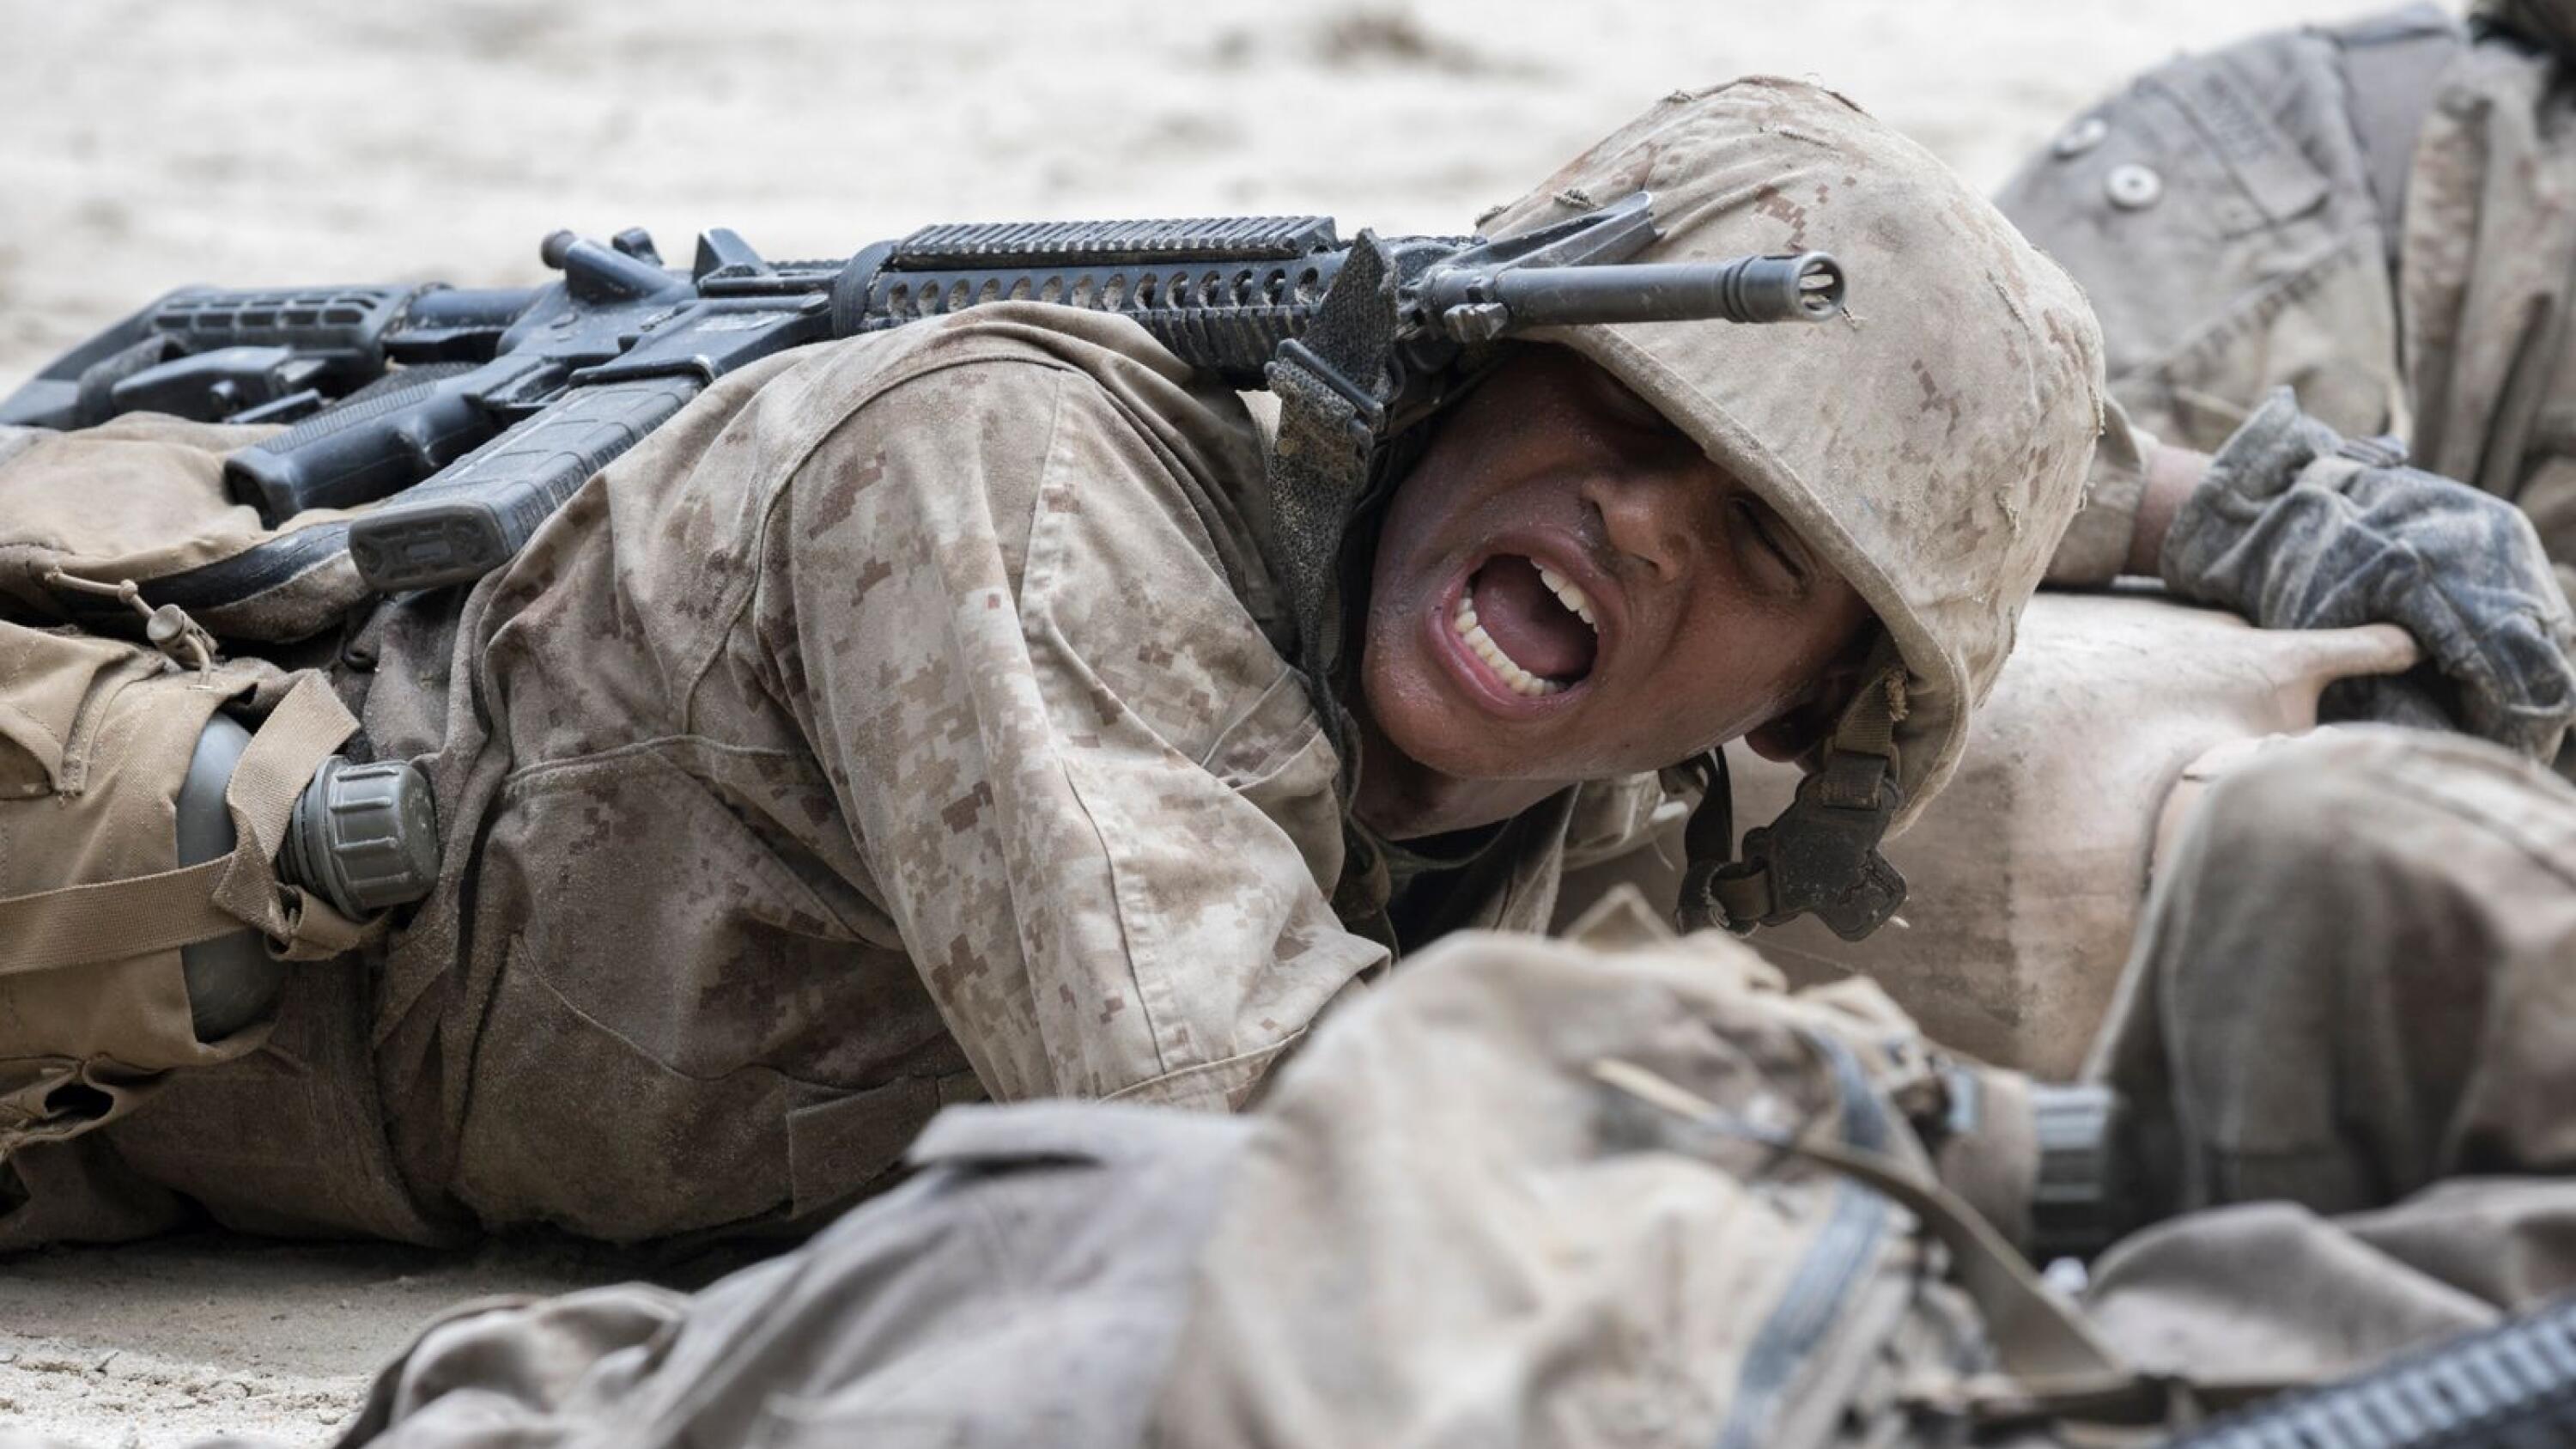 The Few, the Proud' aren't so few: Marines recruiting surges while